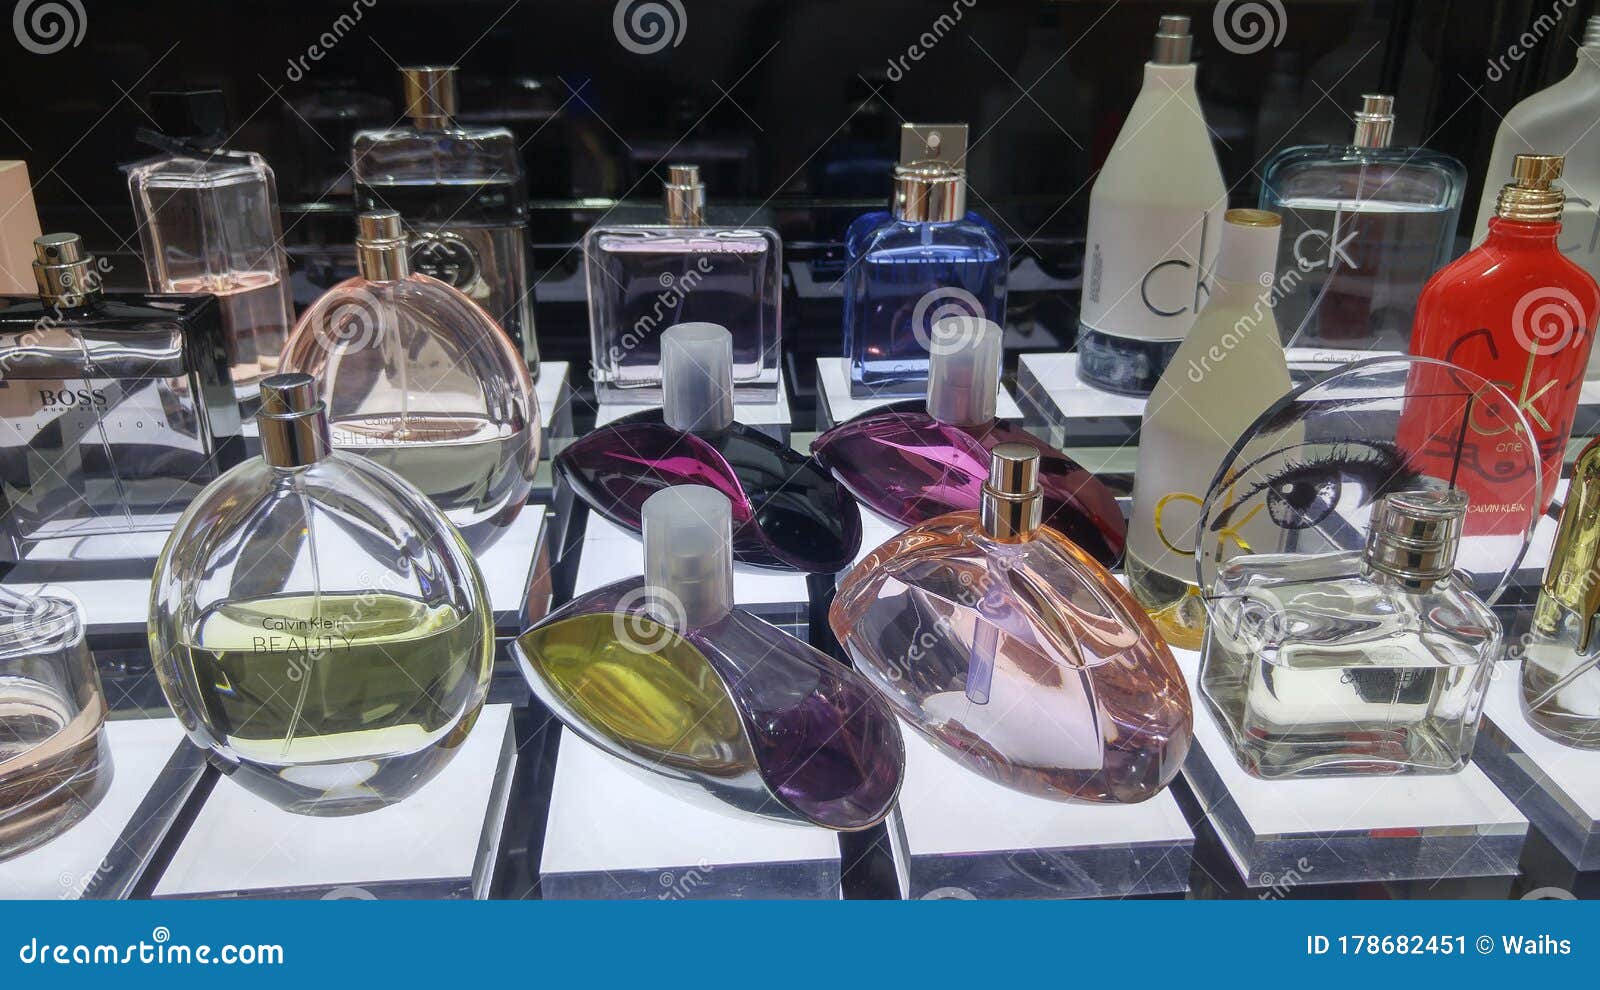 The Cosmetic Counter Sells Cosmetics and Skin Care Products Such As Perfume  Editorial Photo - Image of store, care: 178682451